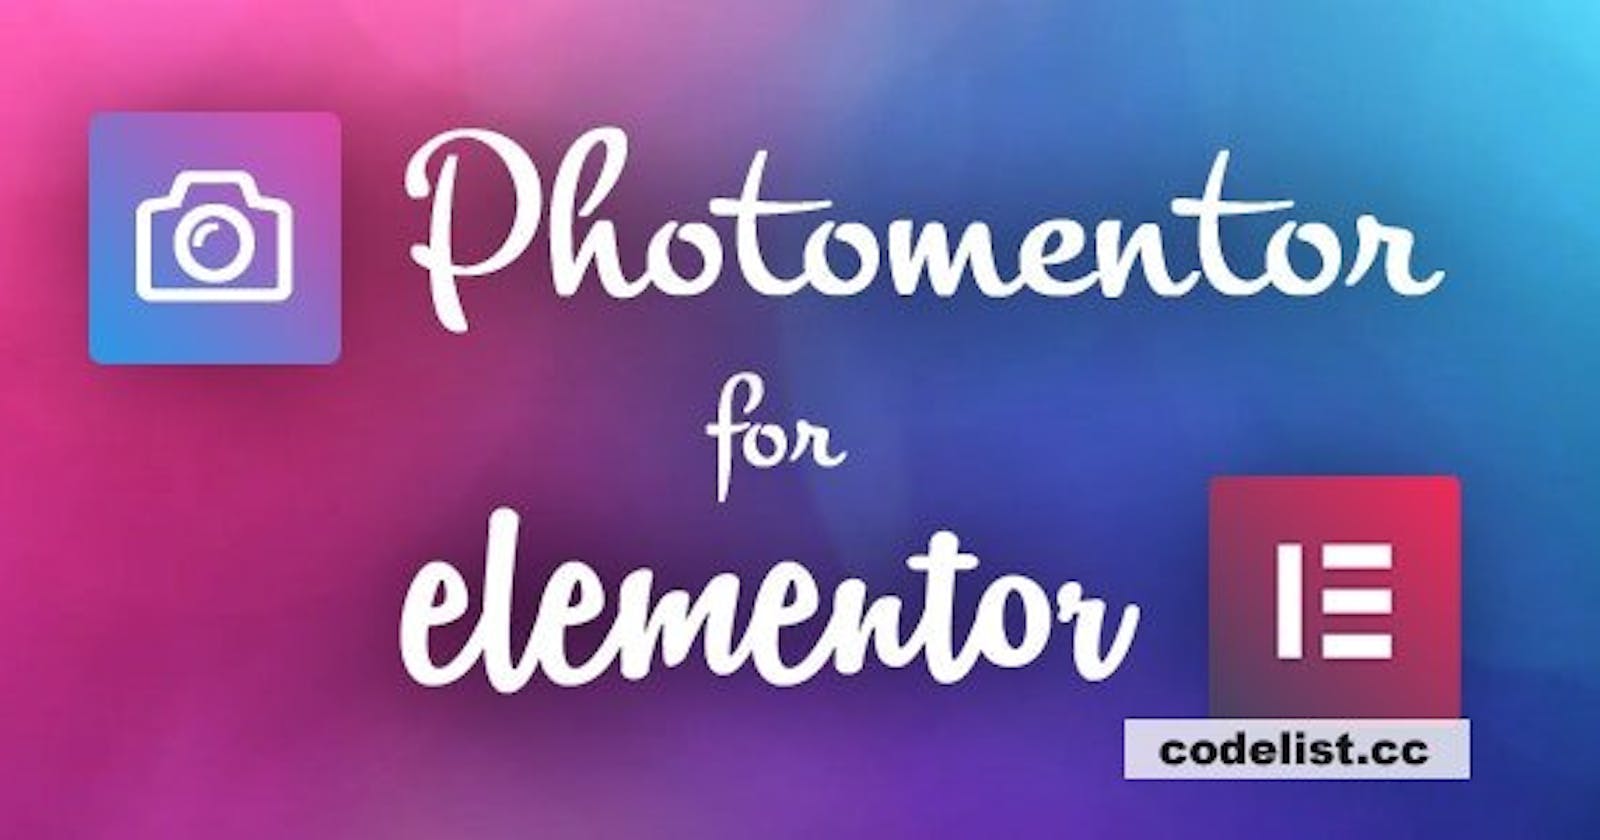 Photomentor v7.0 - Elementor Filterable Photo and Video Gallery Plugin with Masonry Image Layout